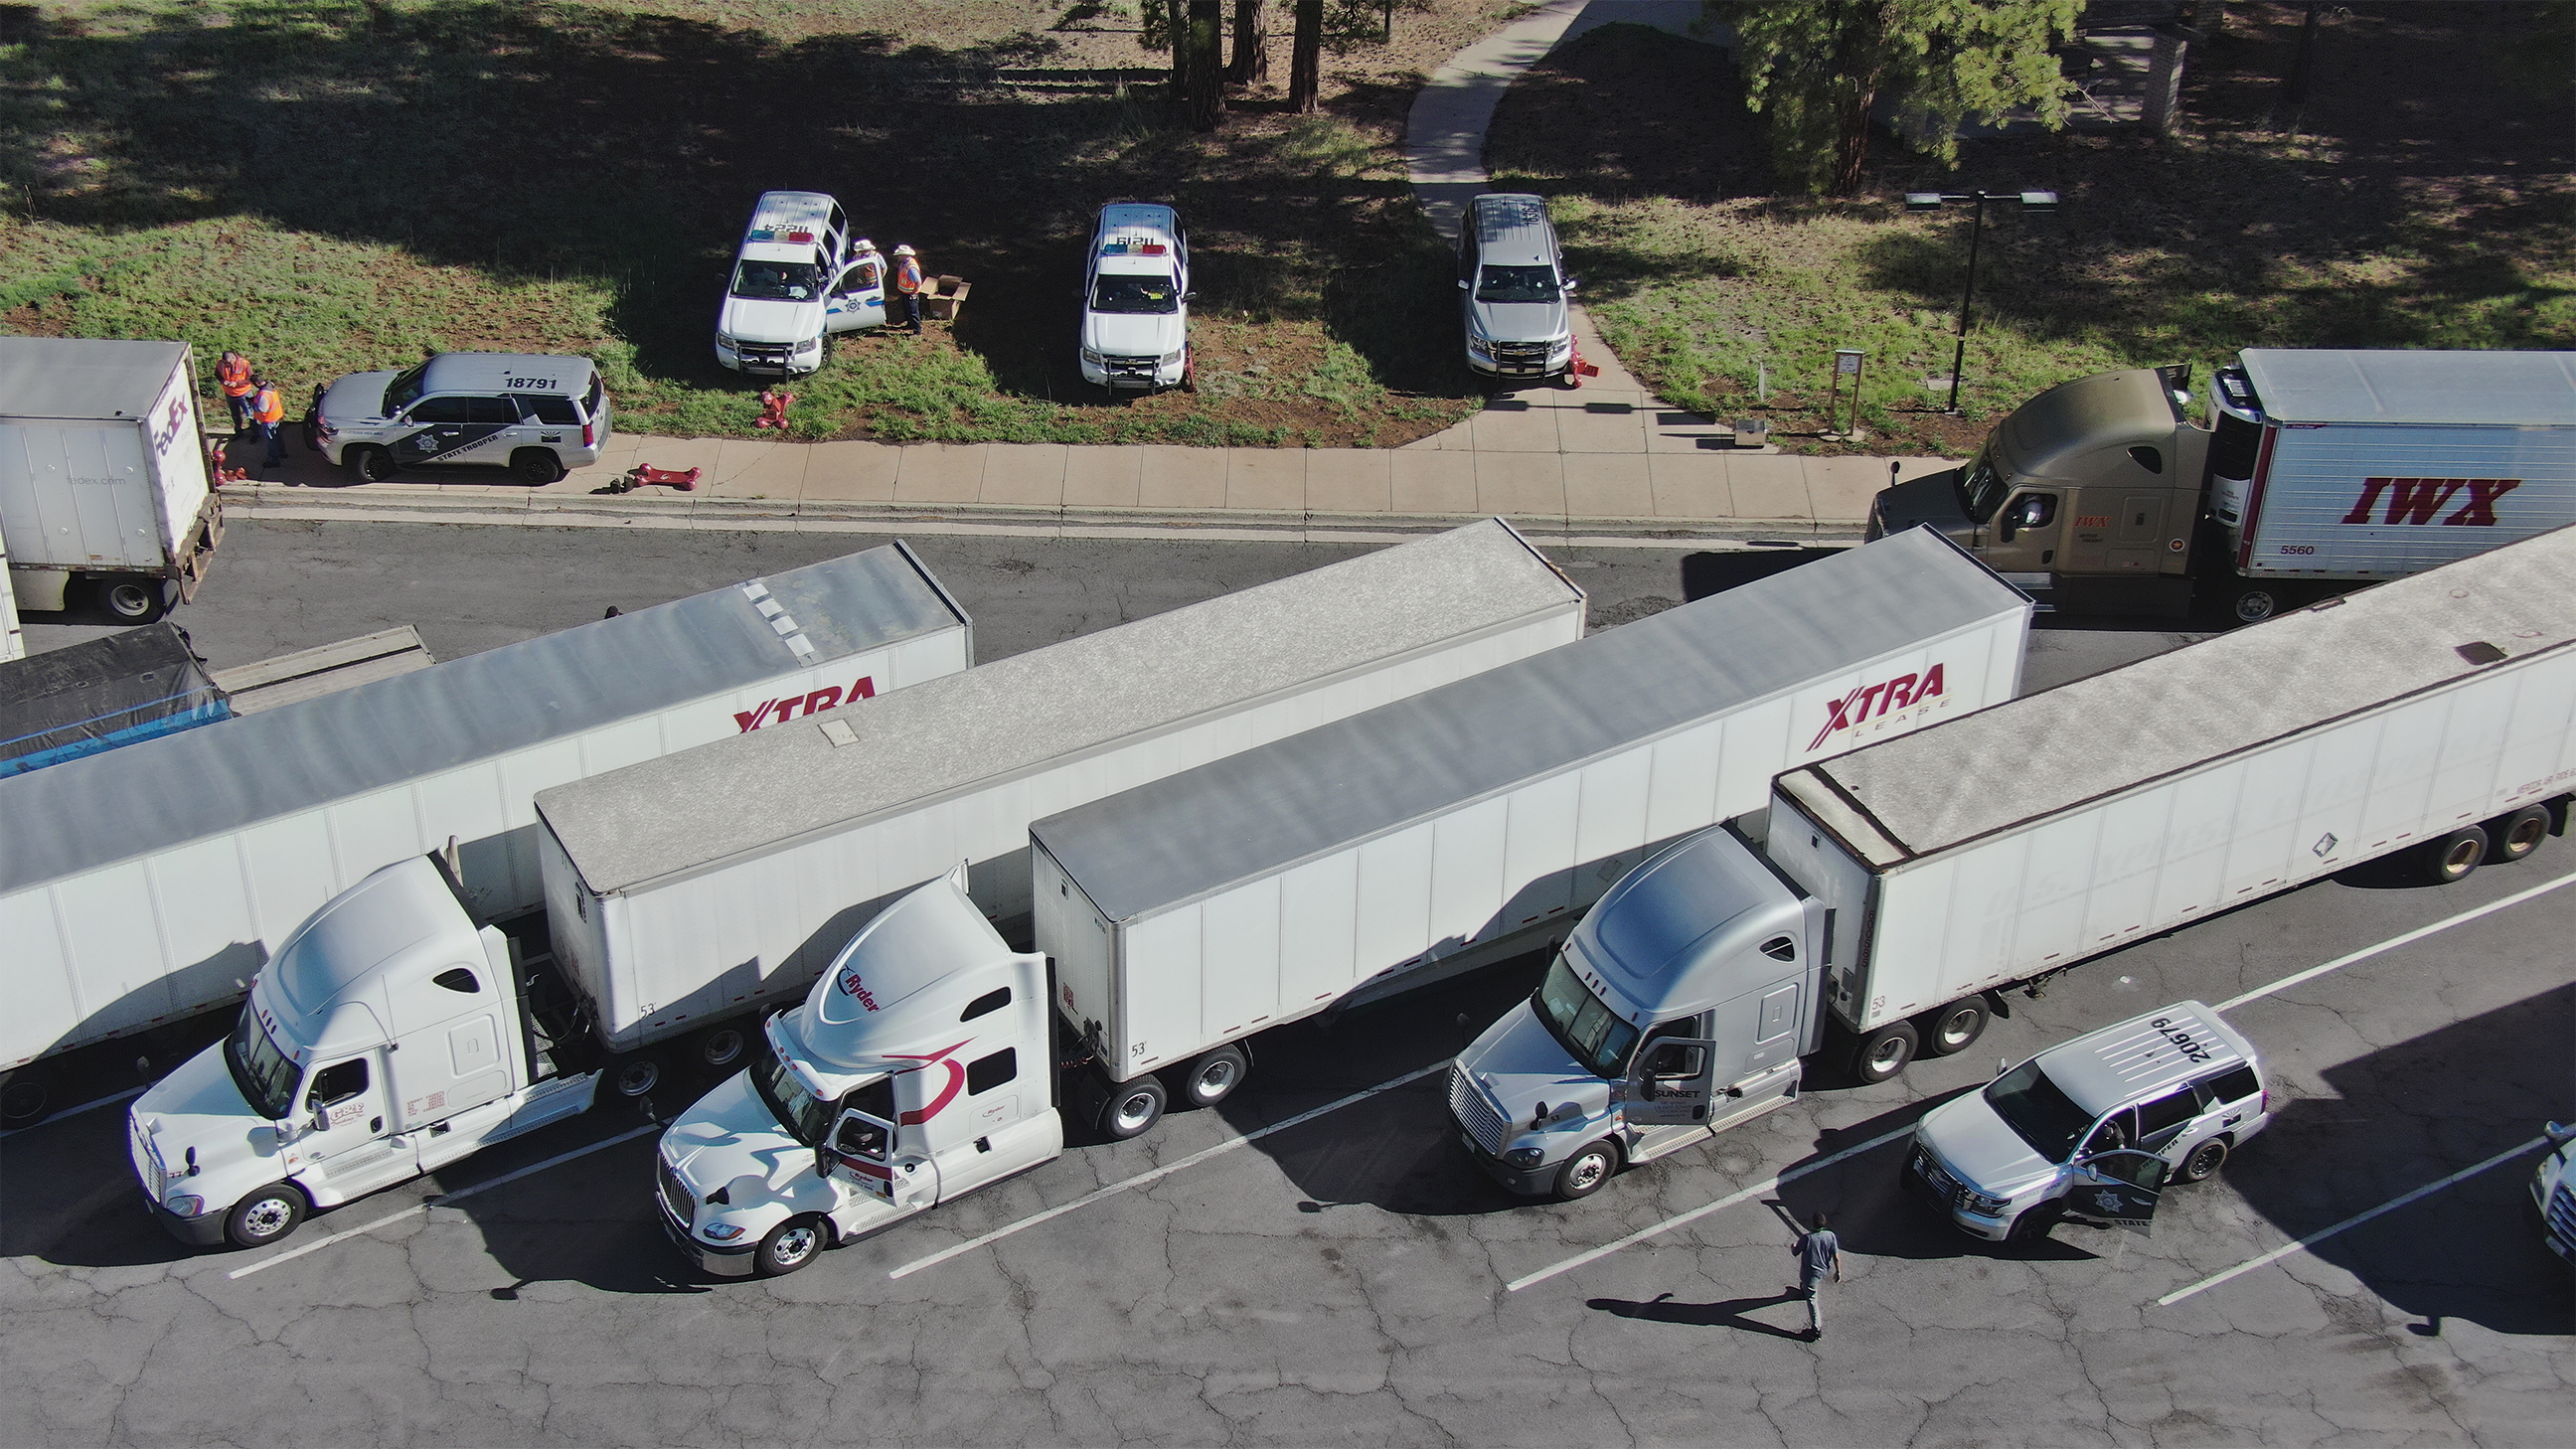 Tractor trailers and law enforcement vehicles are seen from above parked at an inspection area in northern Arizona